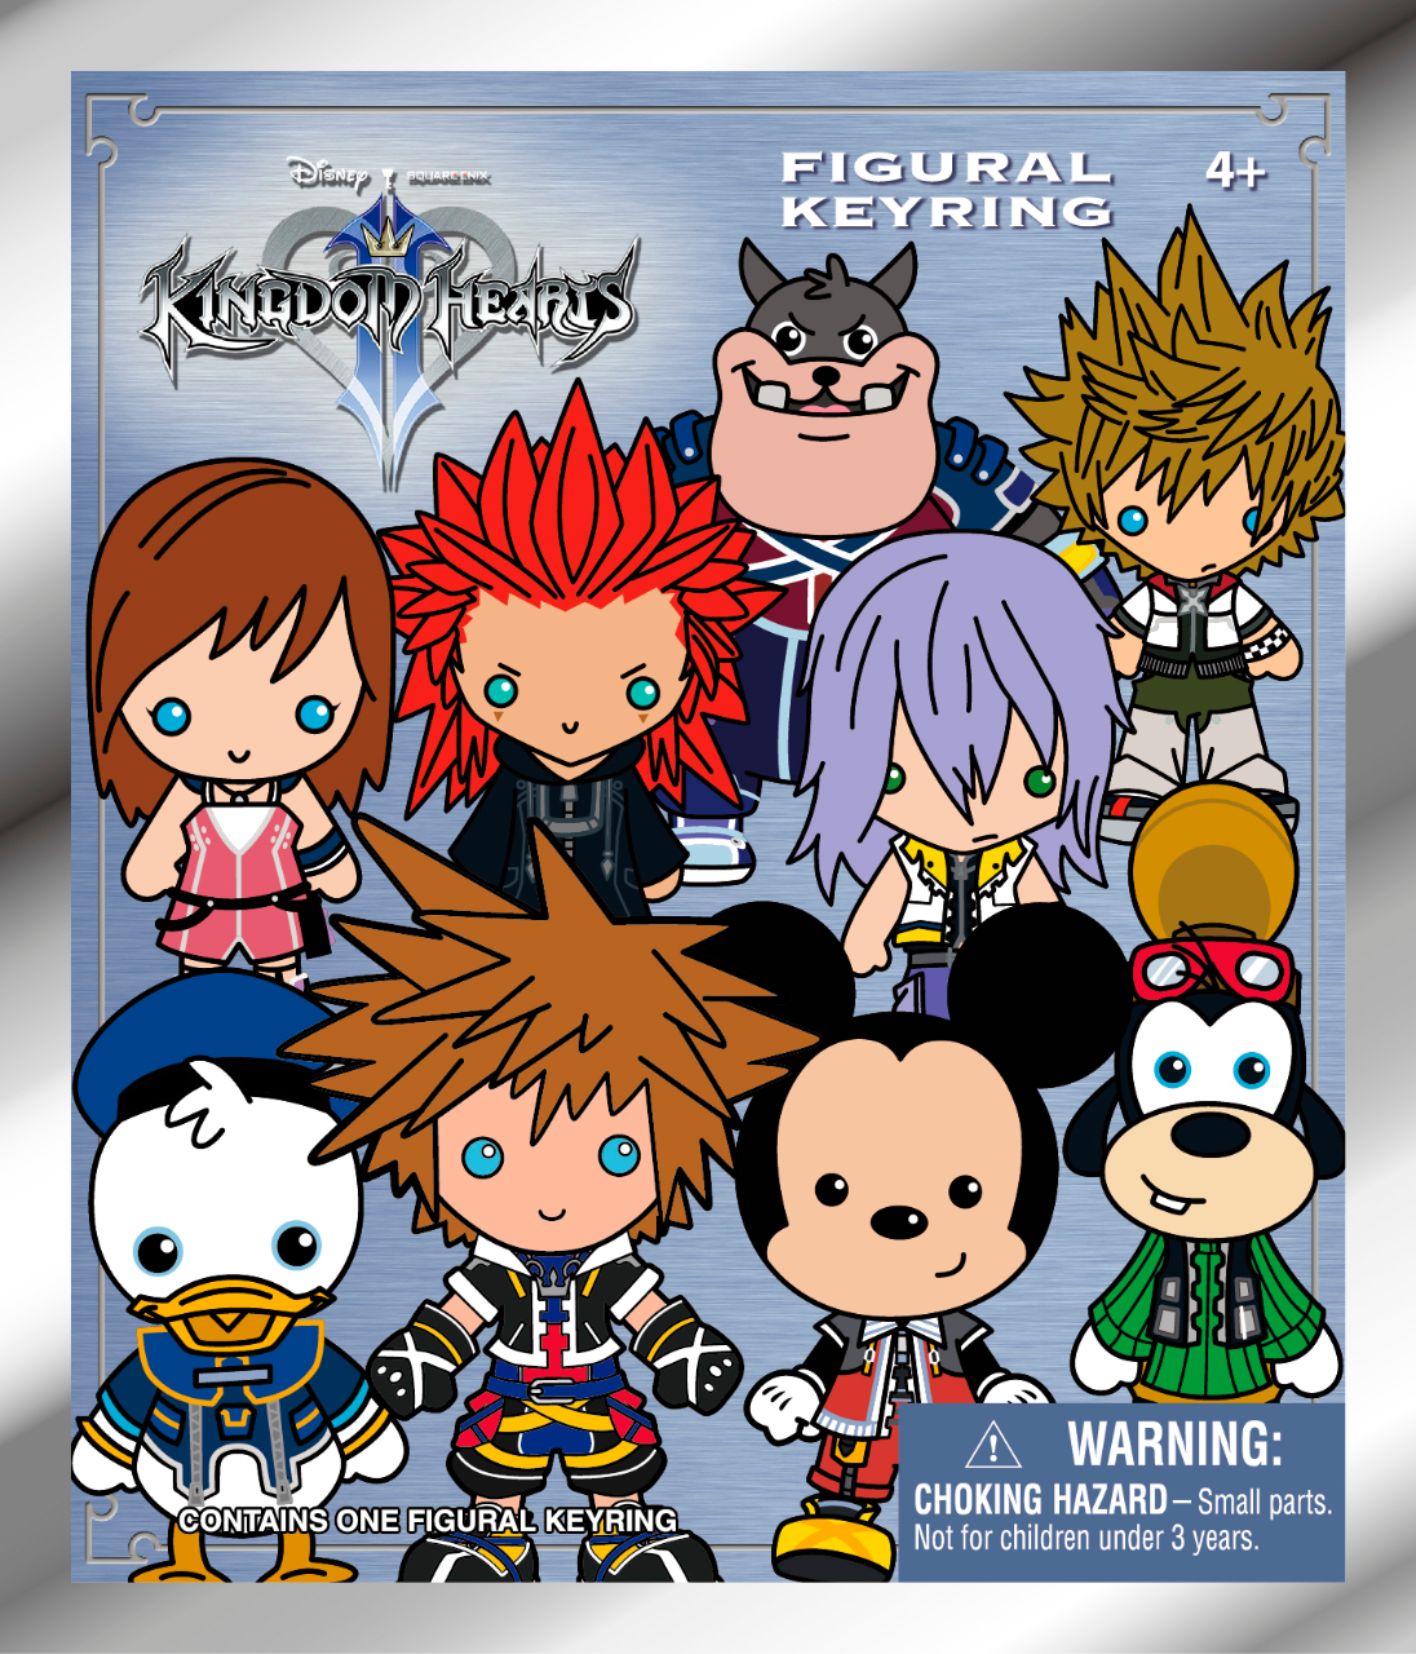 Details about   DISNEY KINGDOM HEARTS BIG BAD PETE FIGURAL KEY CHAIN OPEN BLIND PACK NO GUESS 